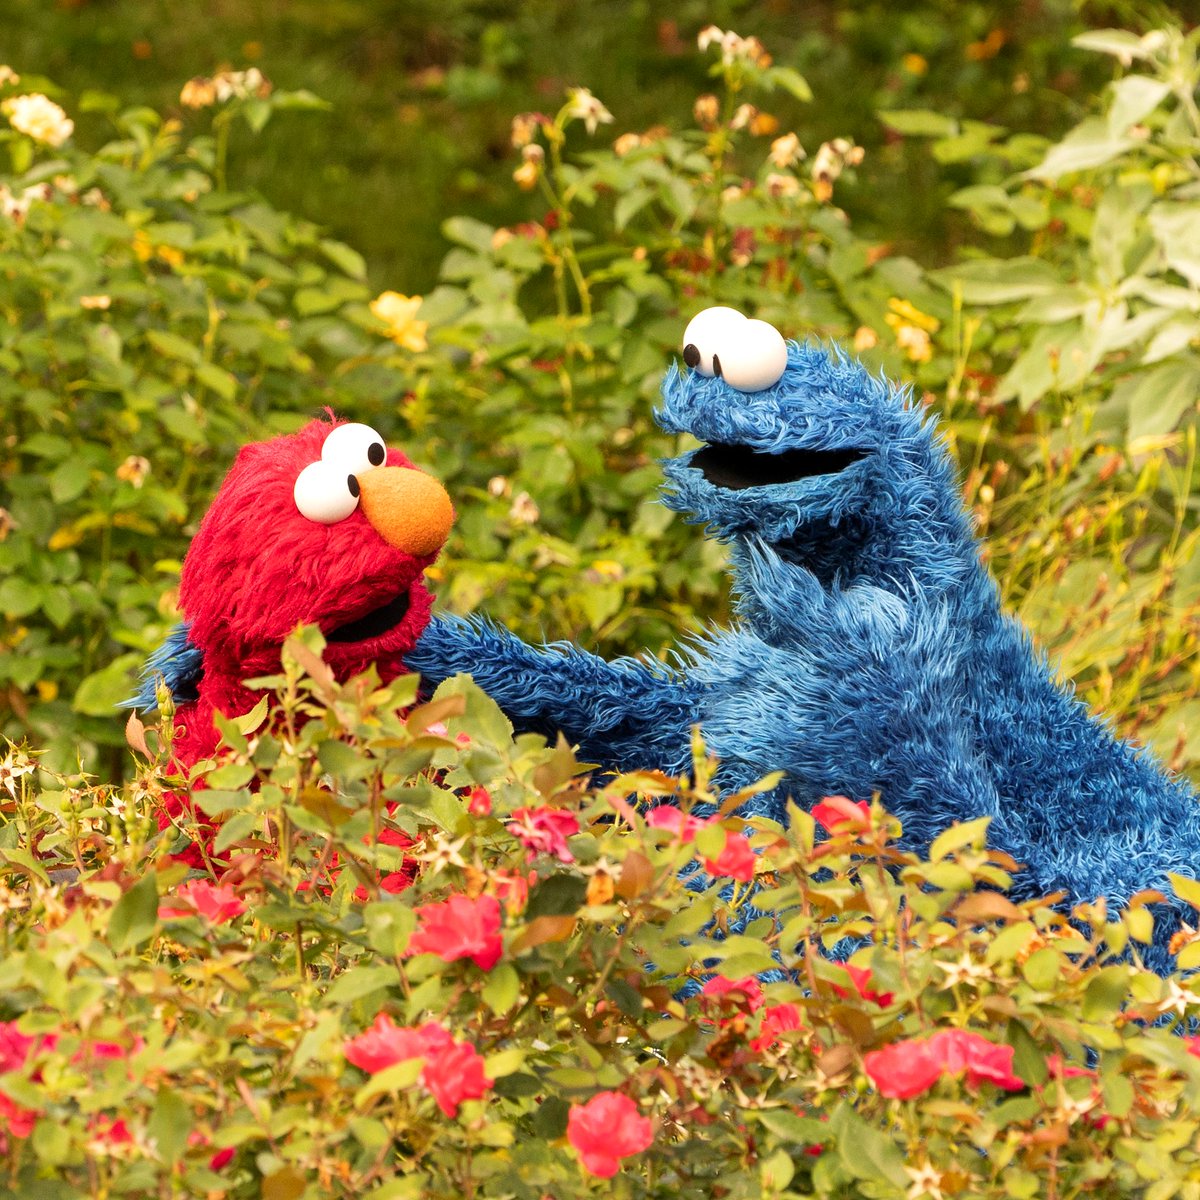 Elmo feels really lucky to have a friend like @MeCookieMonster! Who are YOU thankful for today? ❤️